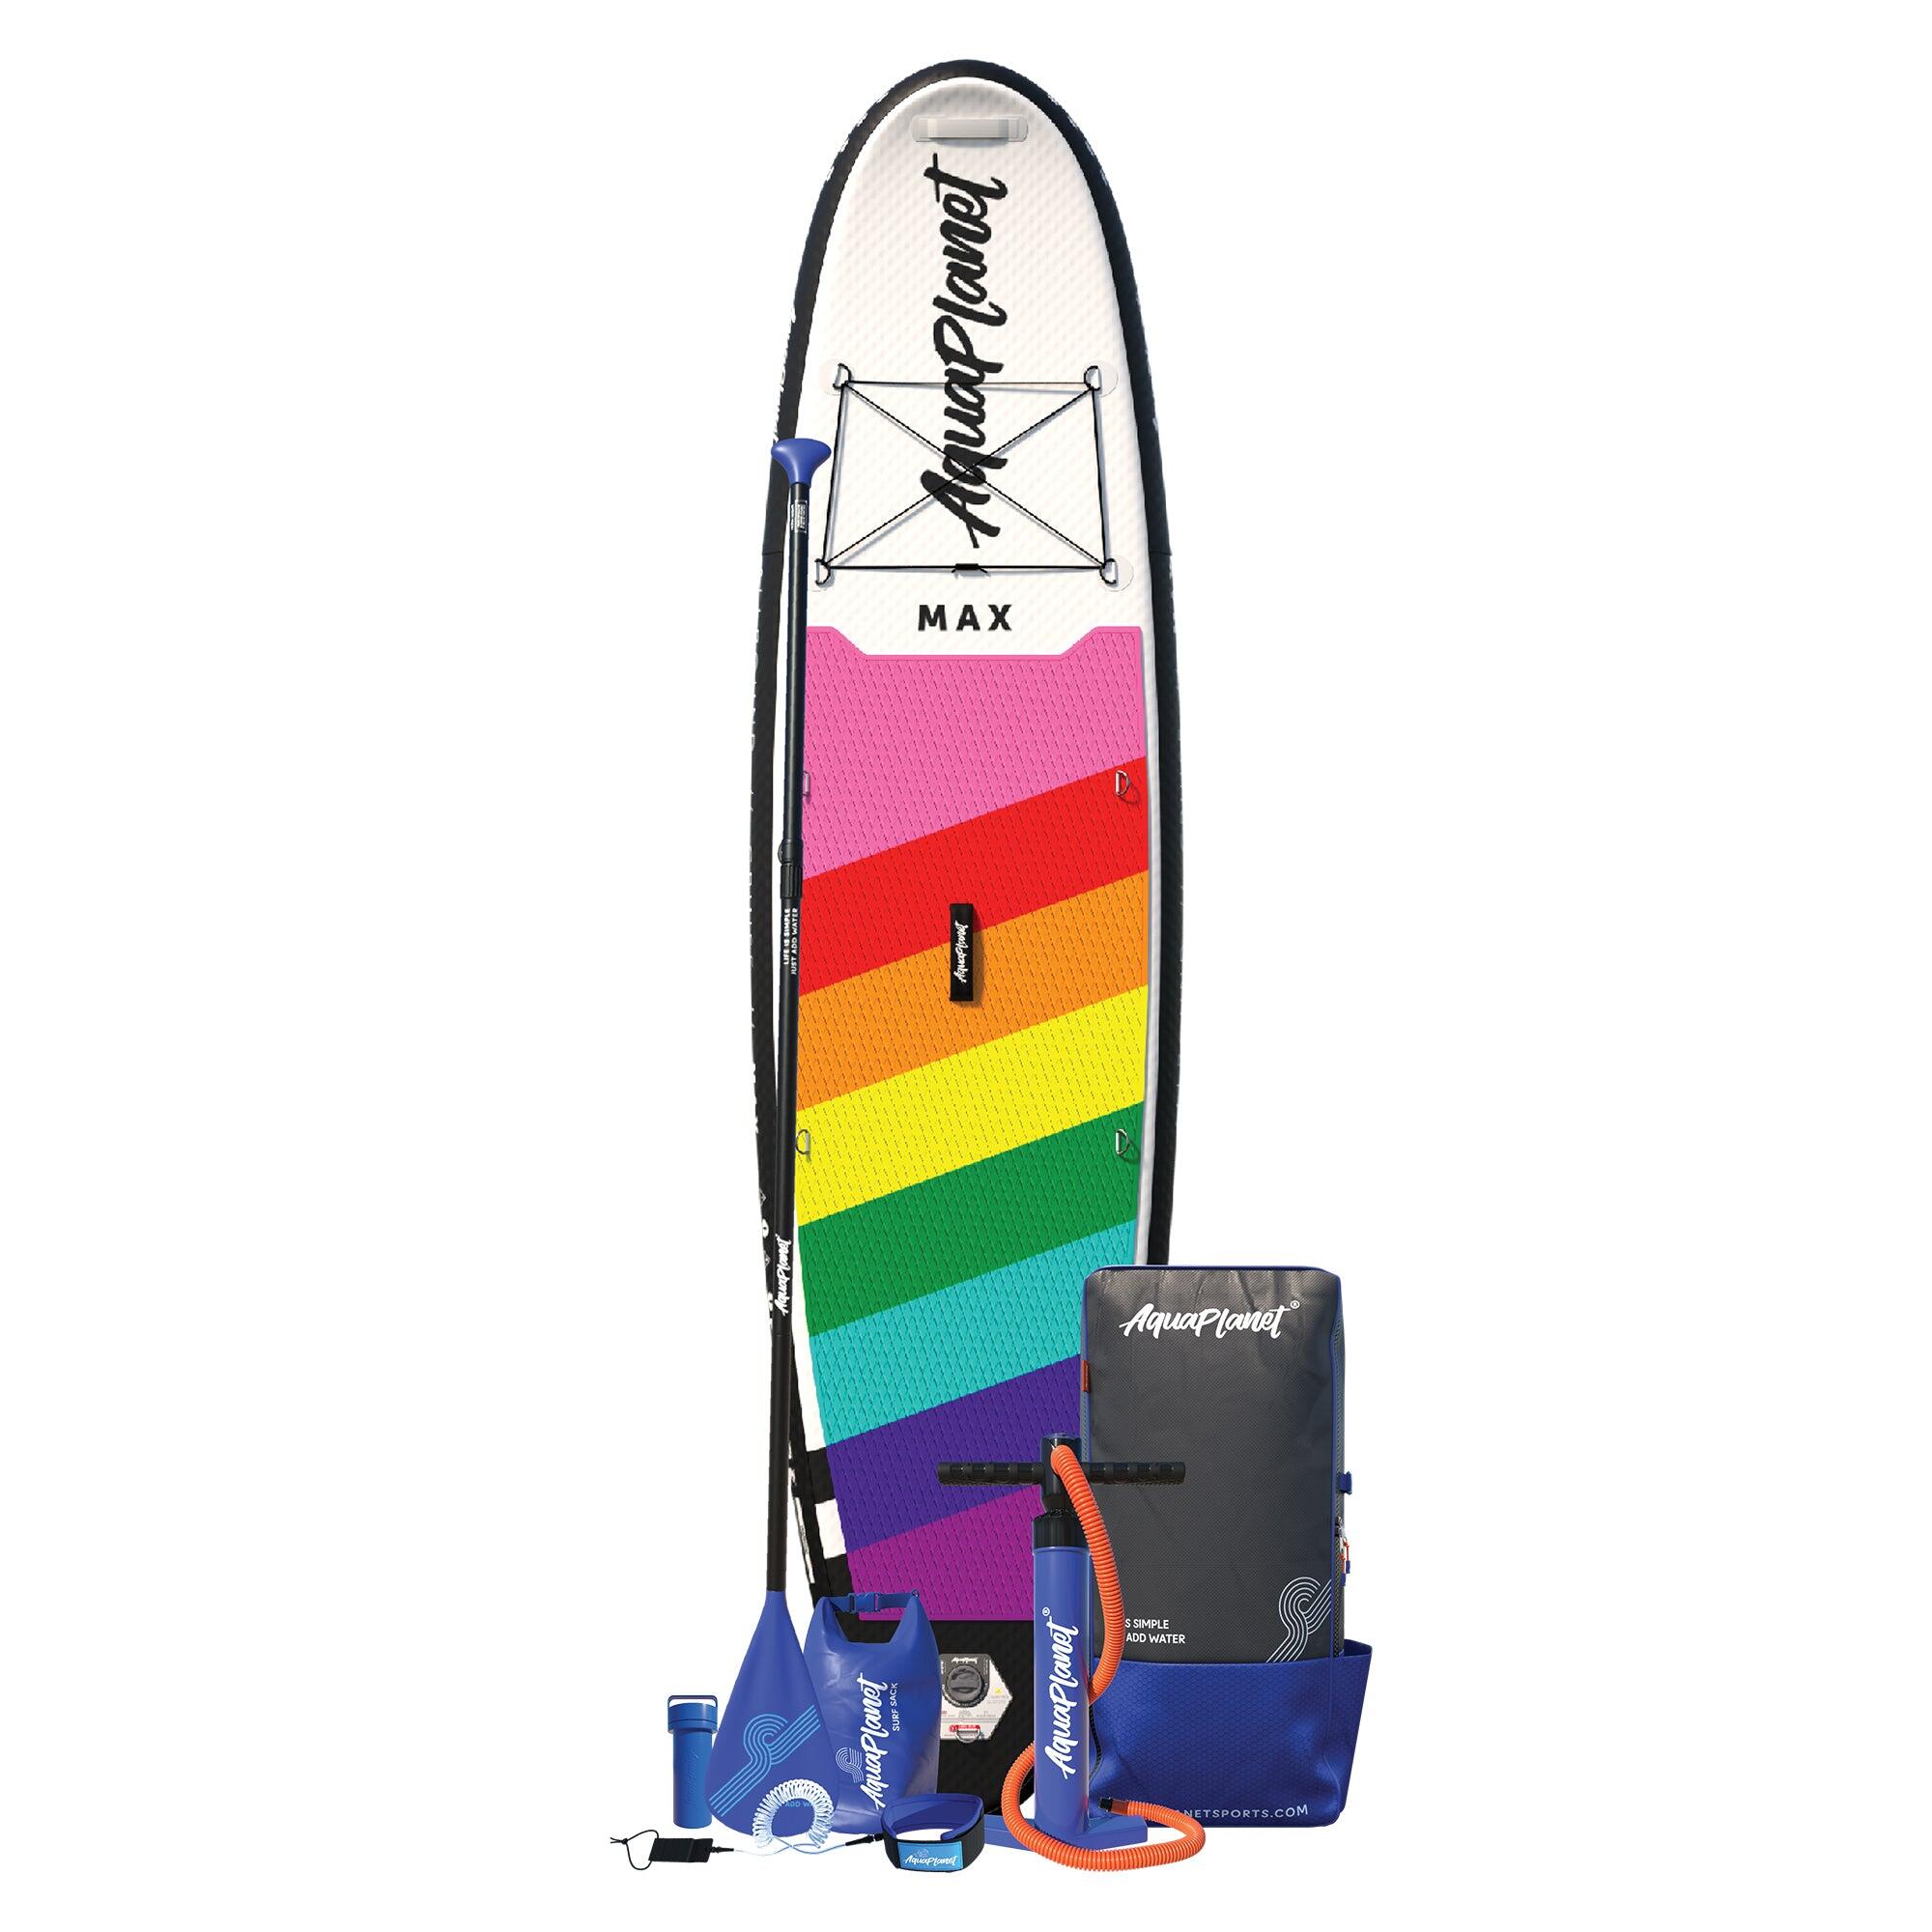 Aquaplanet MAX 10'6 Inflatable Paddle Board Package - Rainbow 2/6